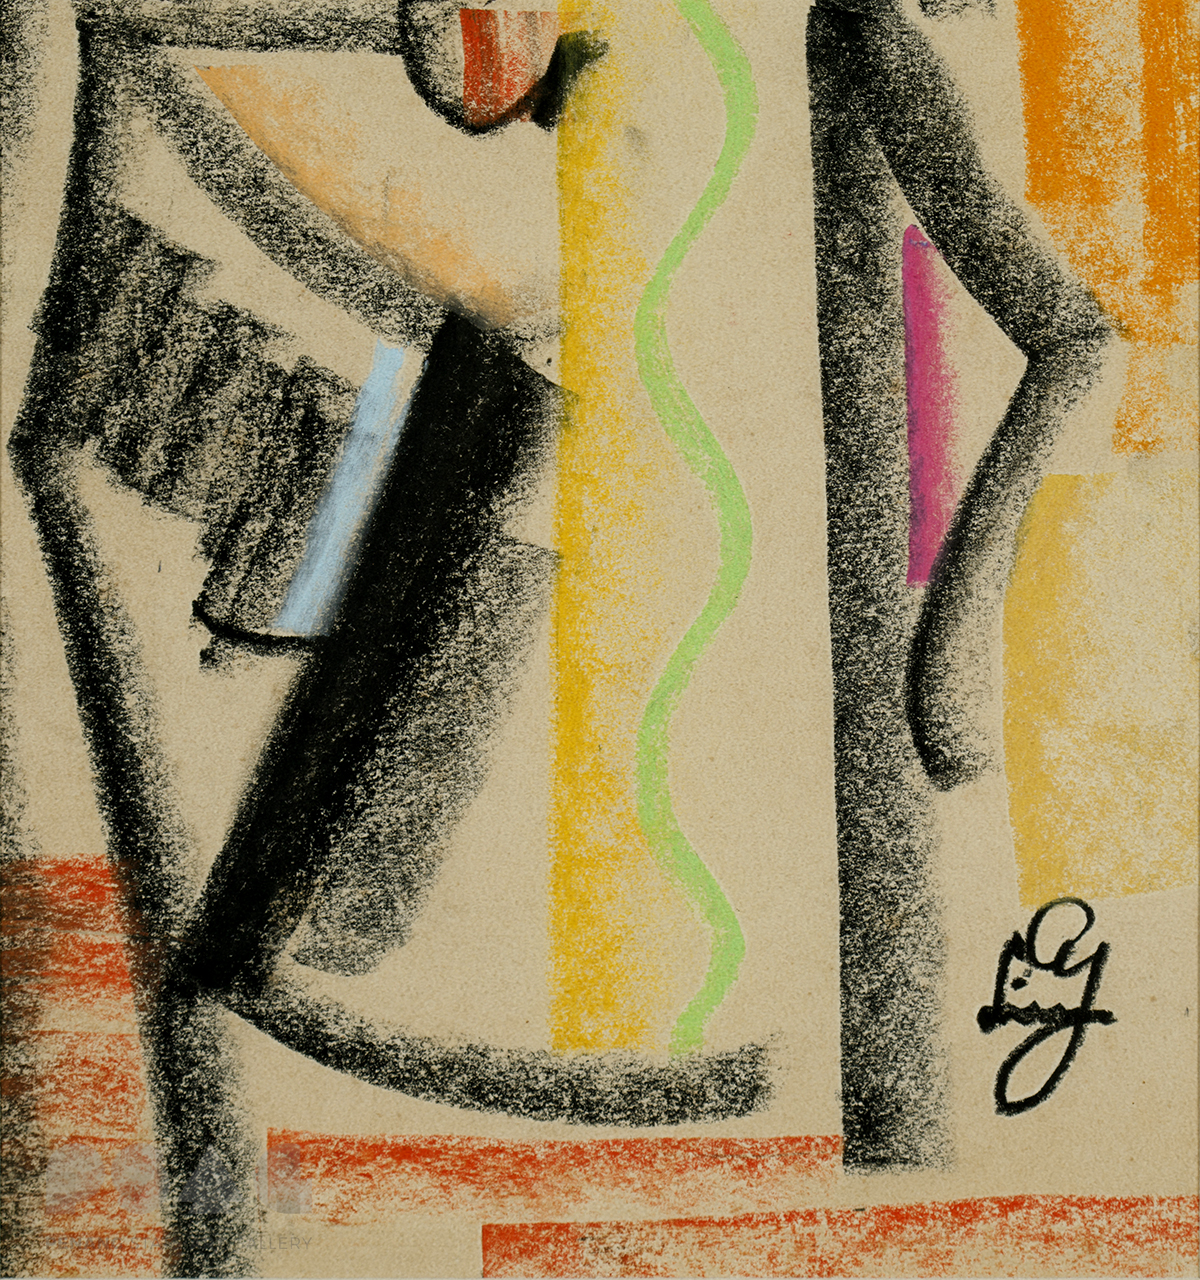 Abstract Figure